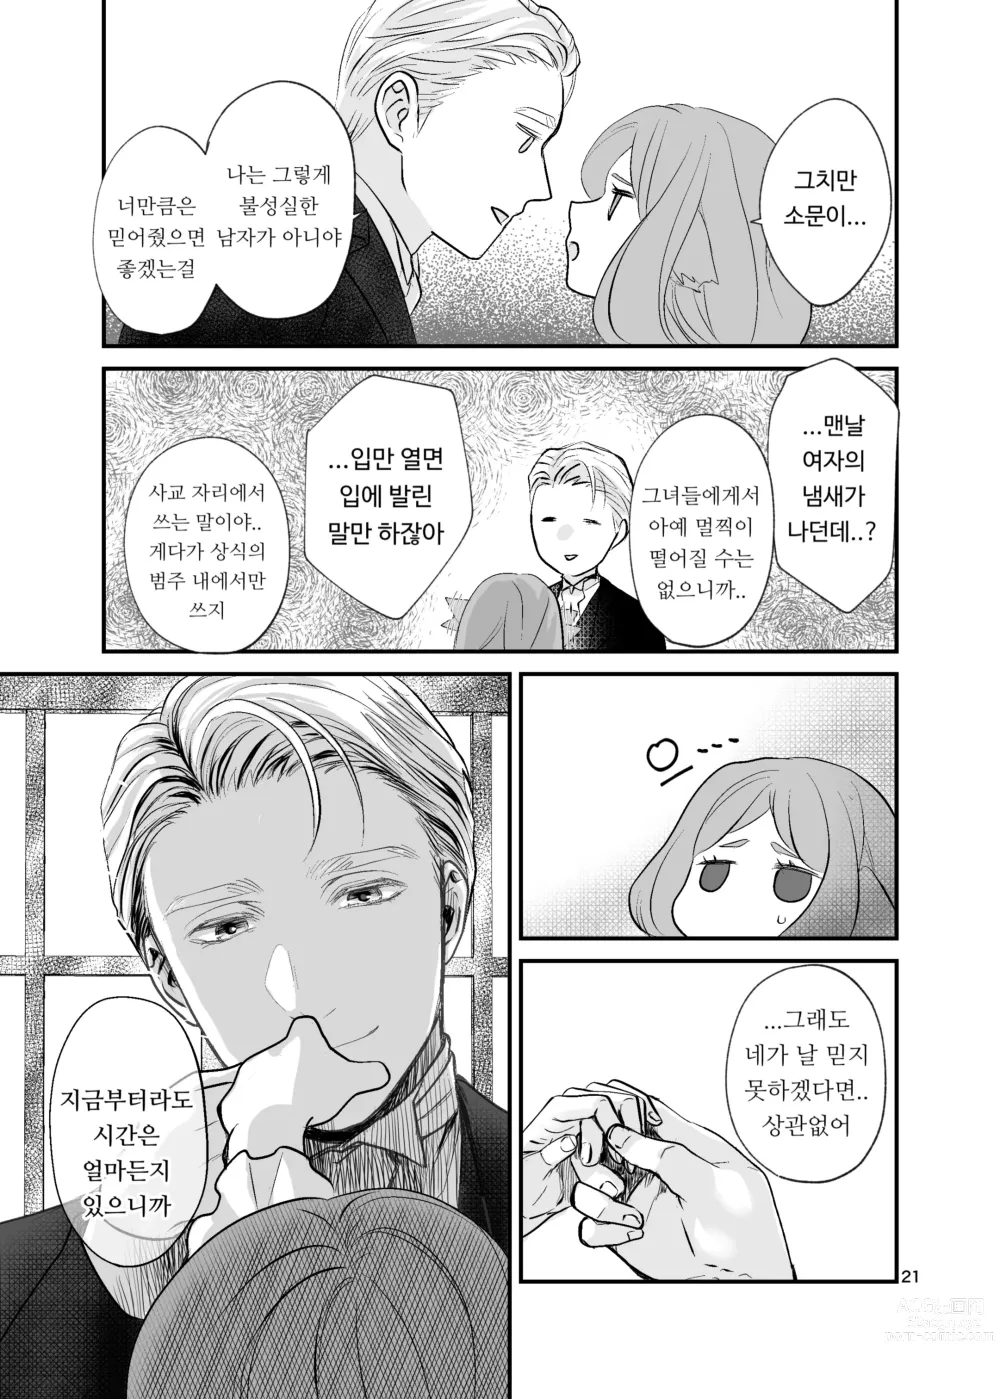 Page 21 of doujinshi 수인 영애와 혼약자